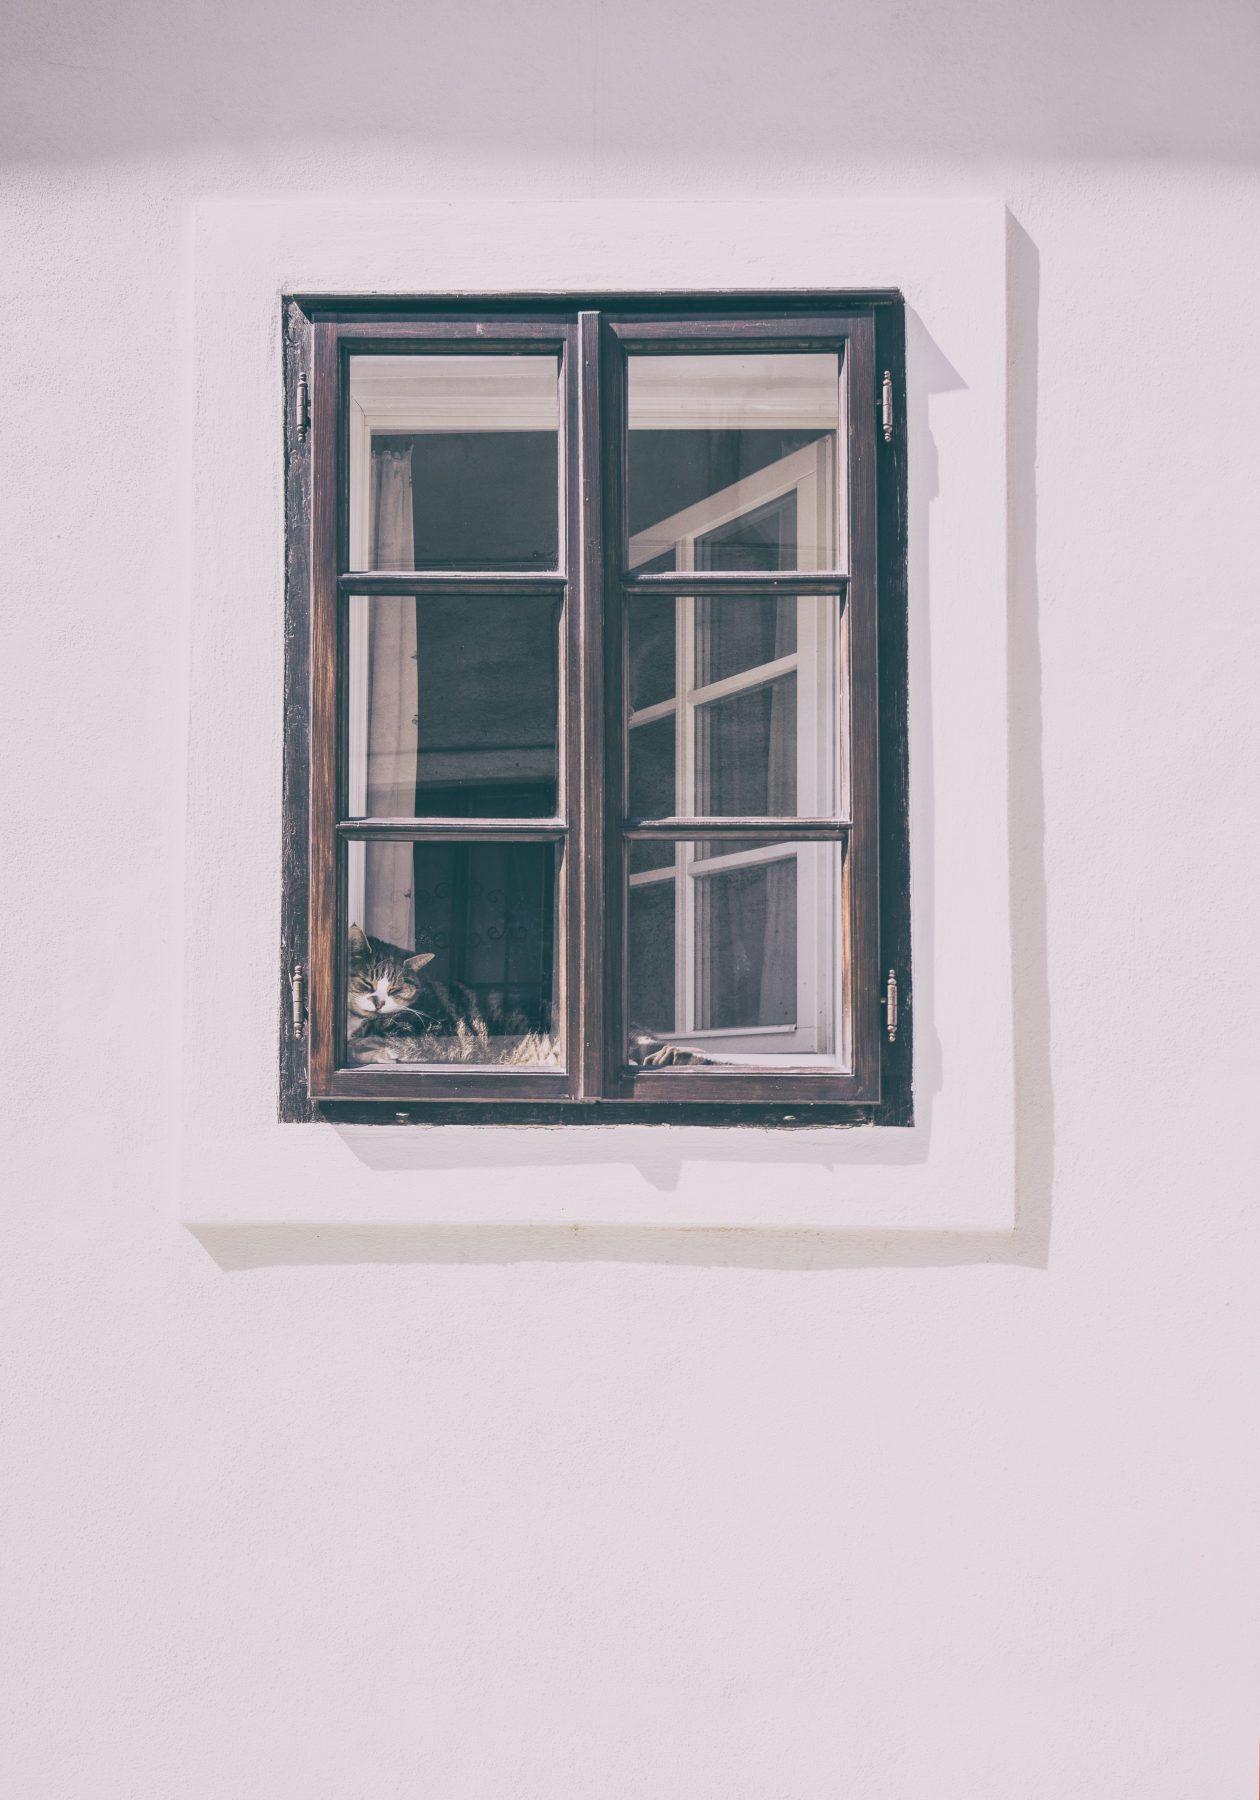 Image of a window into a home with a cat on the windowsill